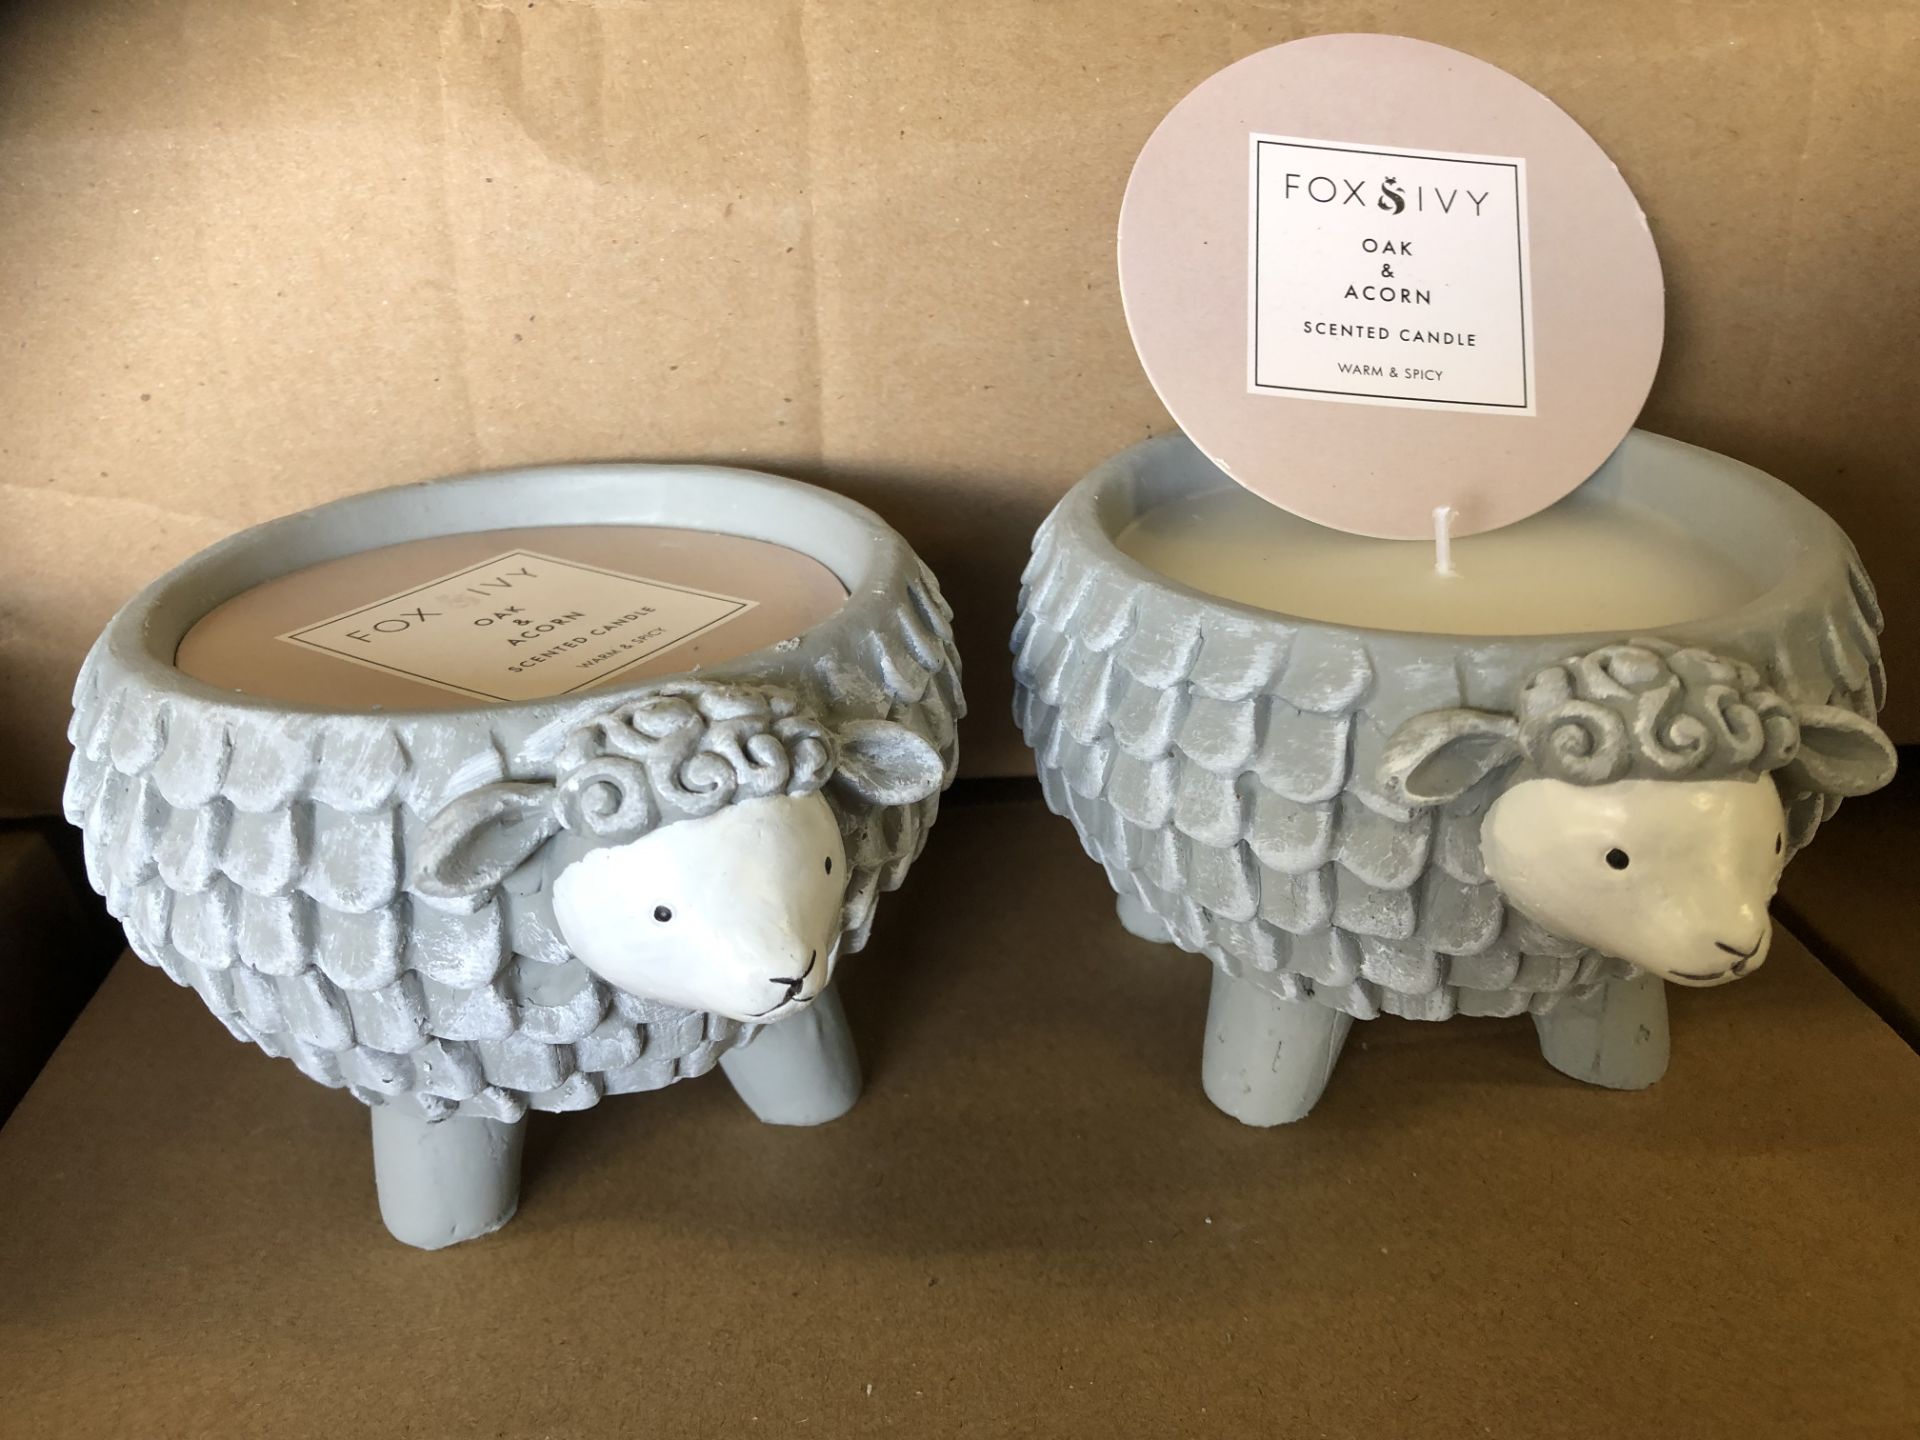 1 BOX 12 FOX & IVY SHEEP CANDLE GREY AND WHITE (TOTAL QUANTITY 12)